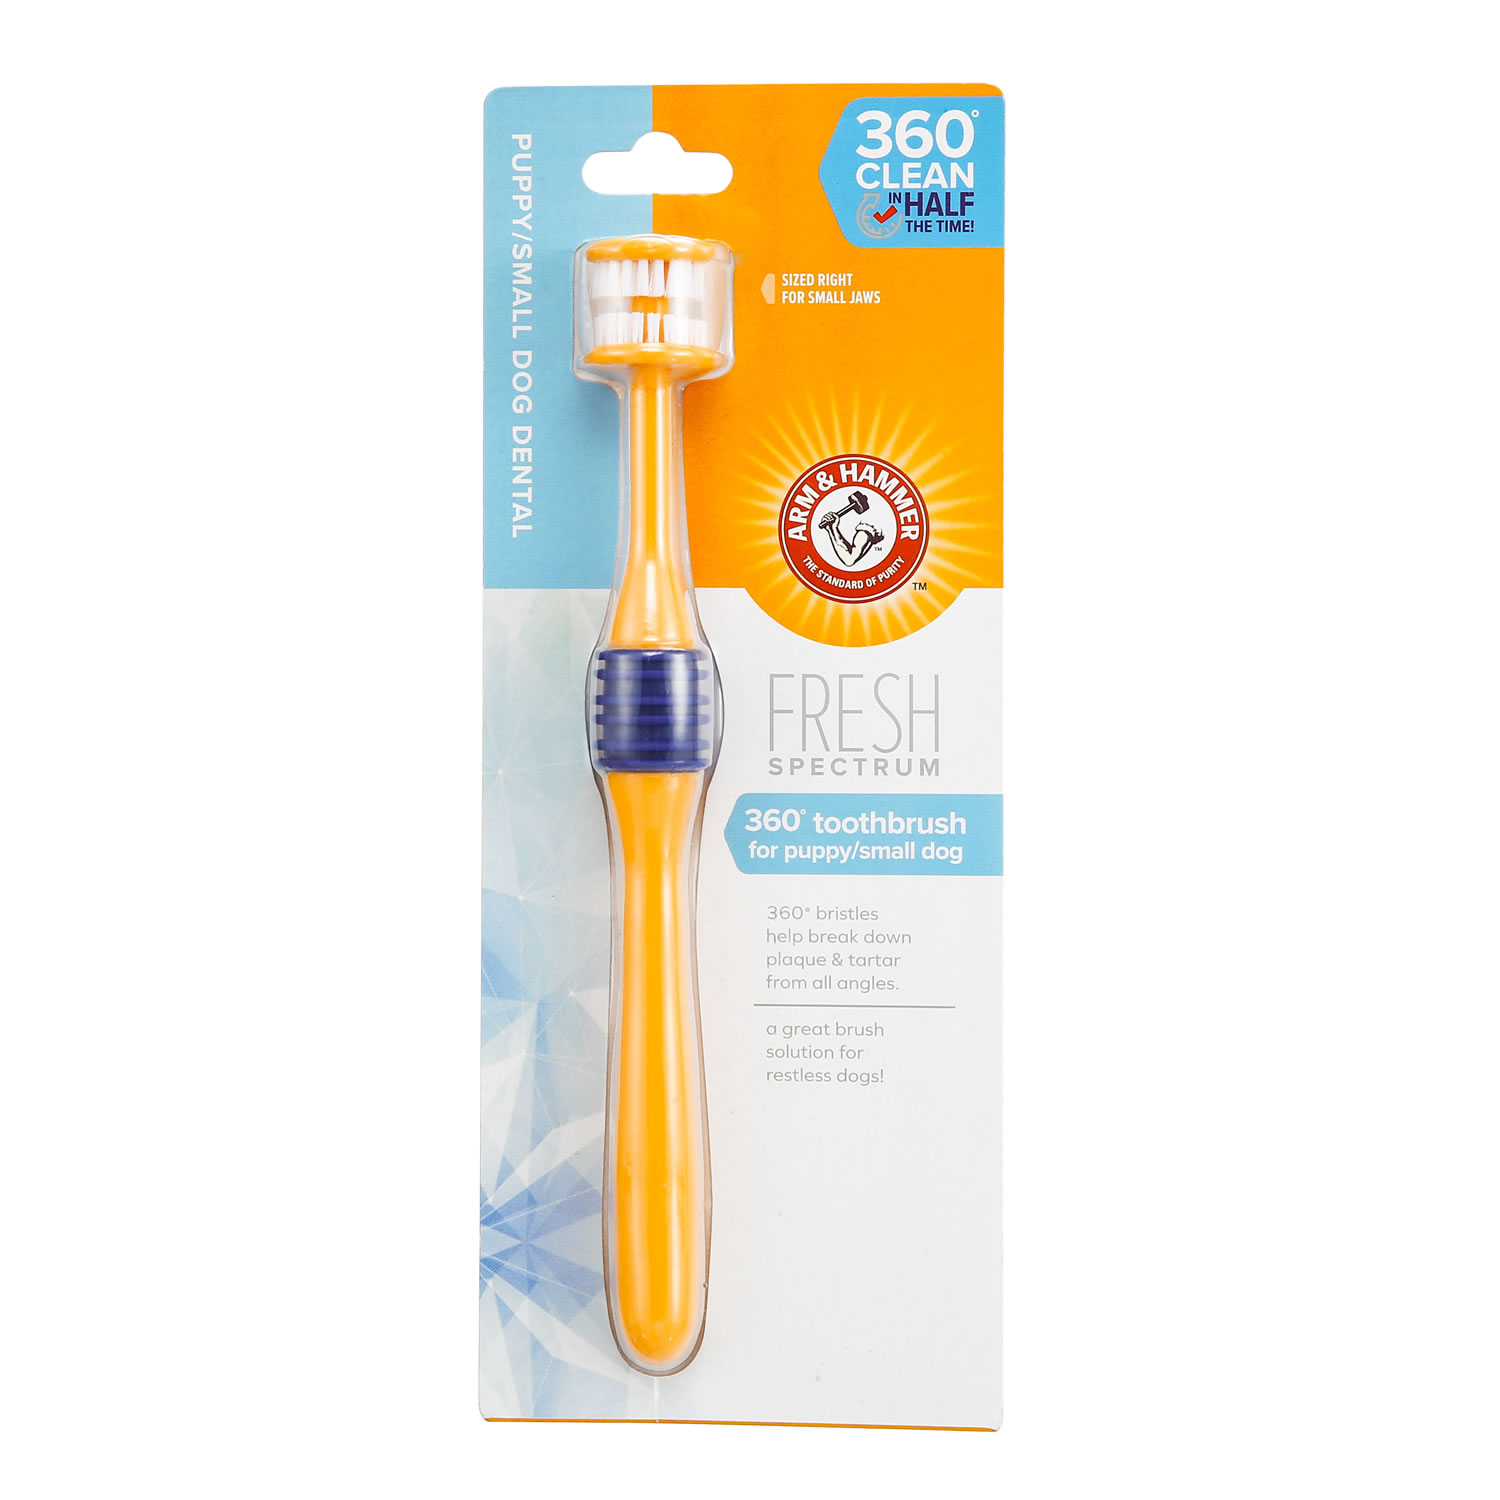 ARM & HAMMER FRESH 360 DEGREE TOOTHBRUSH PUPPY/SMALL PUPPY/SMALL